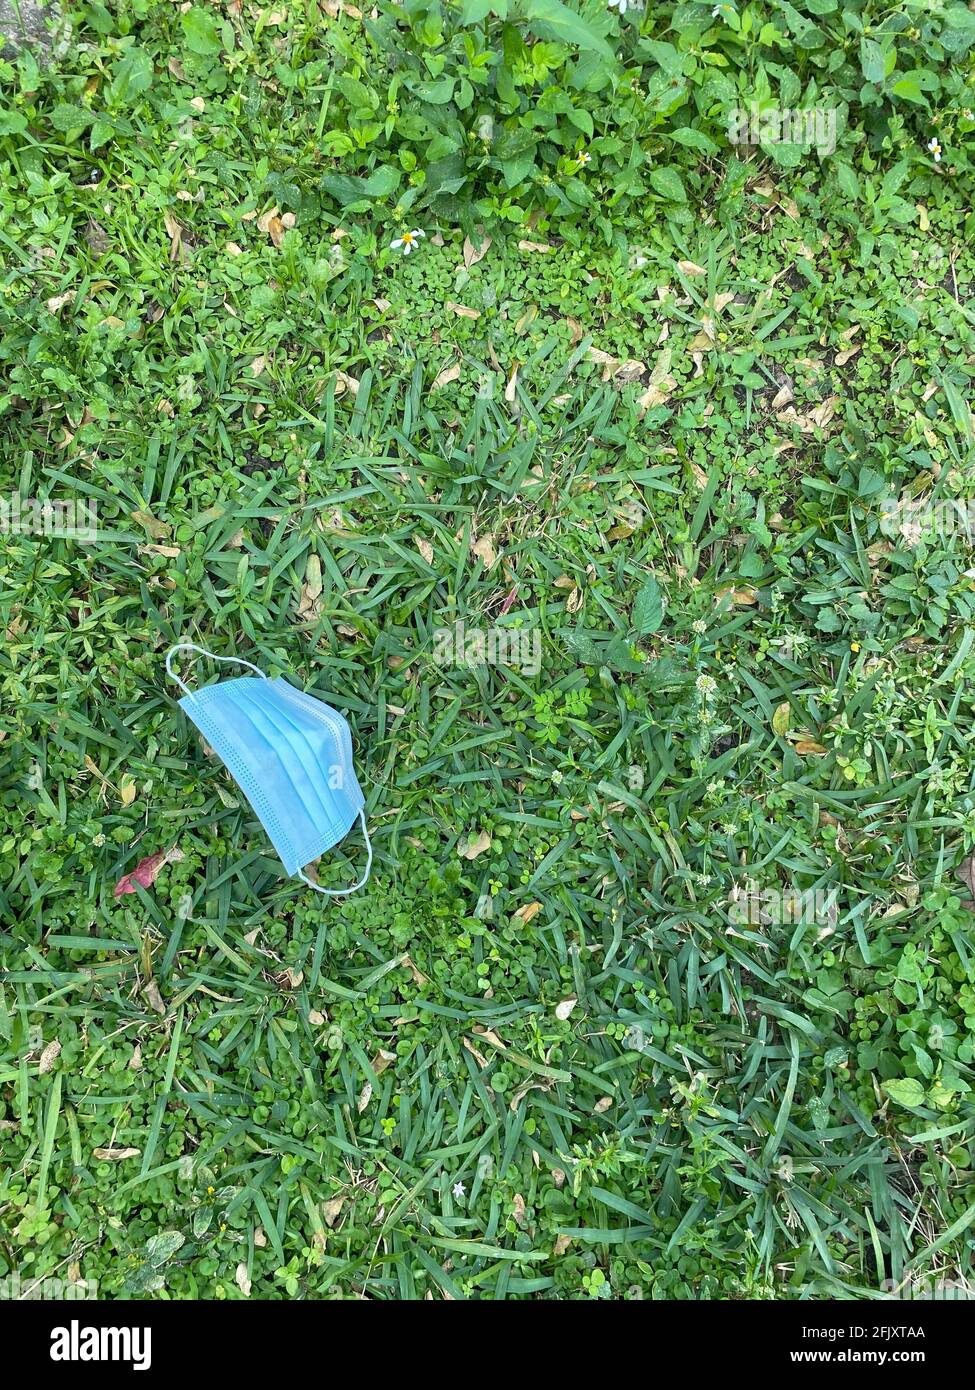 Used face medical mask from a coronavirus patient left on grass in the park spreading germs and viruses infection harming people's respiratory system. Stock Photo